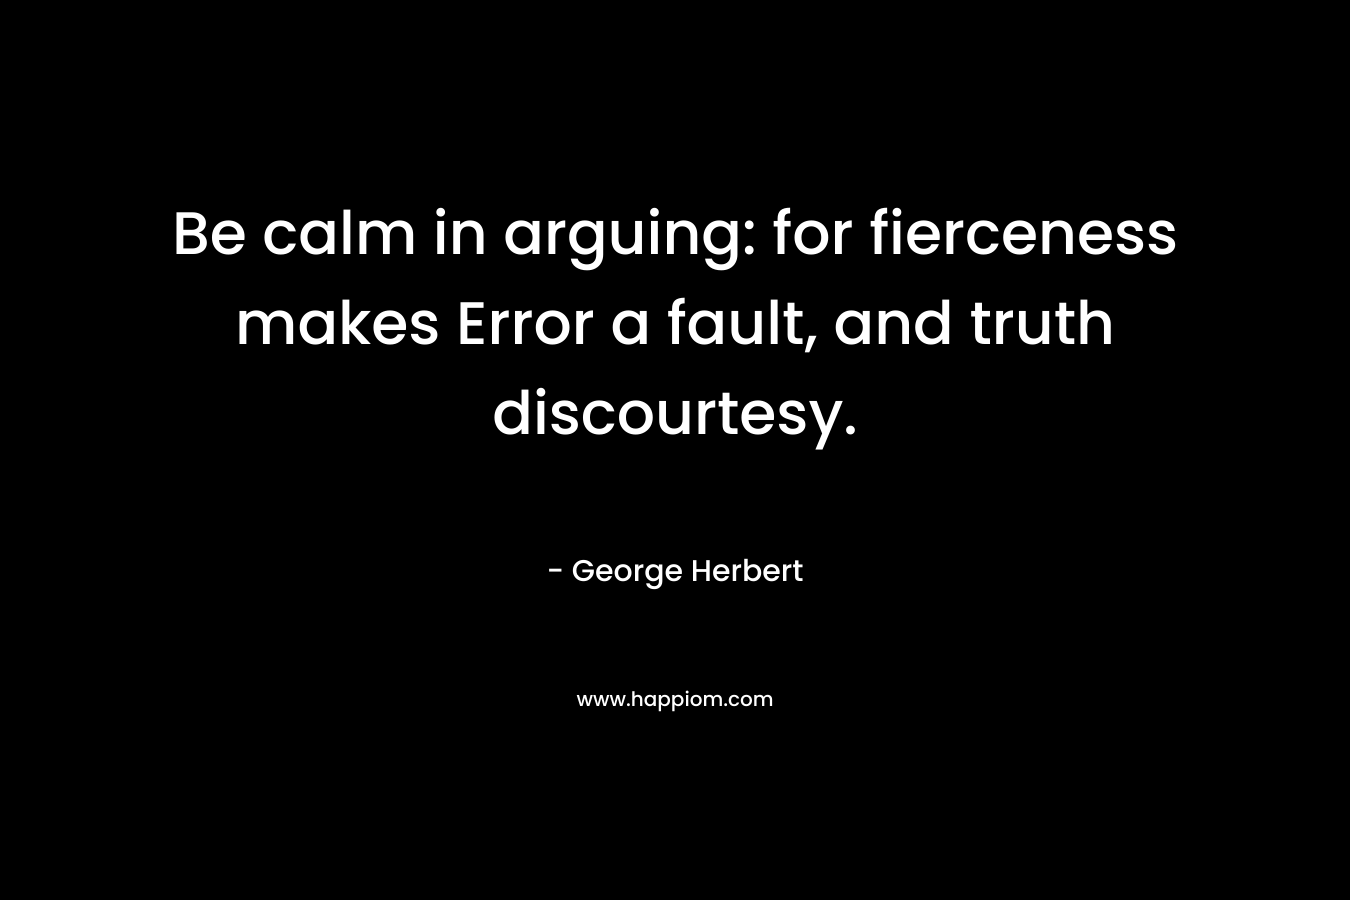 Be calm in arguing: for fierceness makes Error a fault, and truth discourtesy.